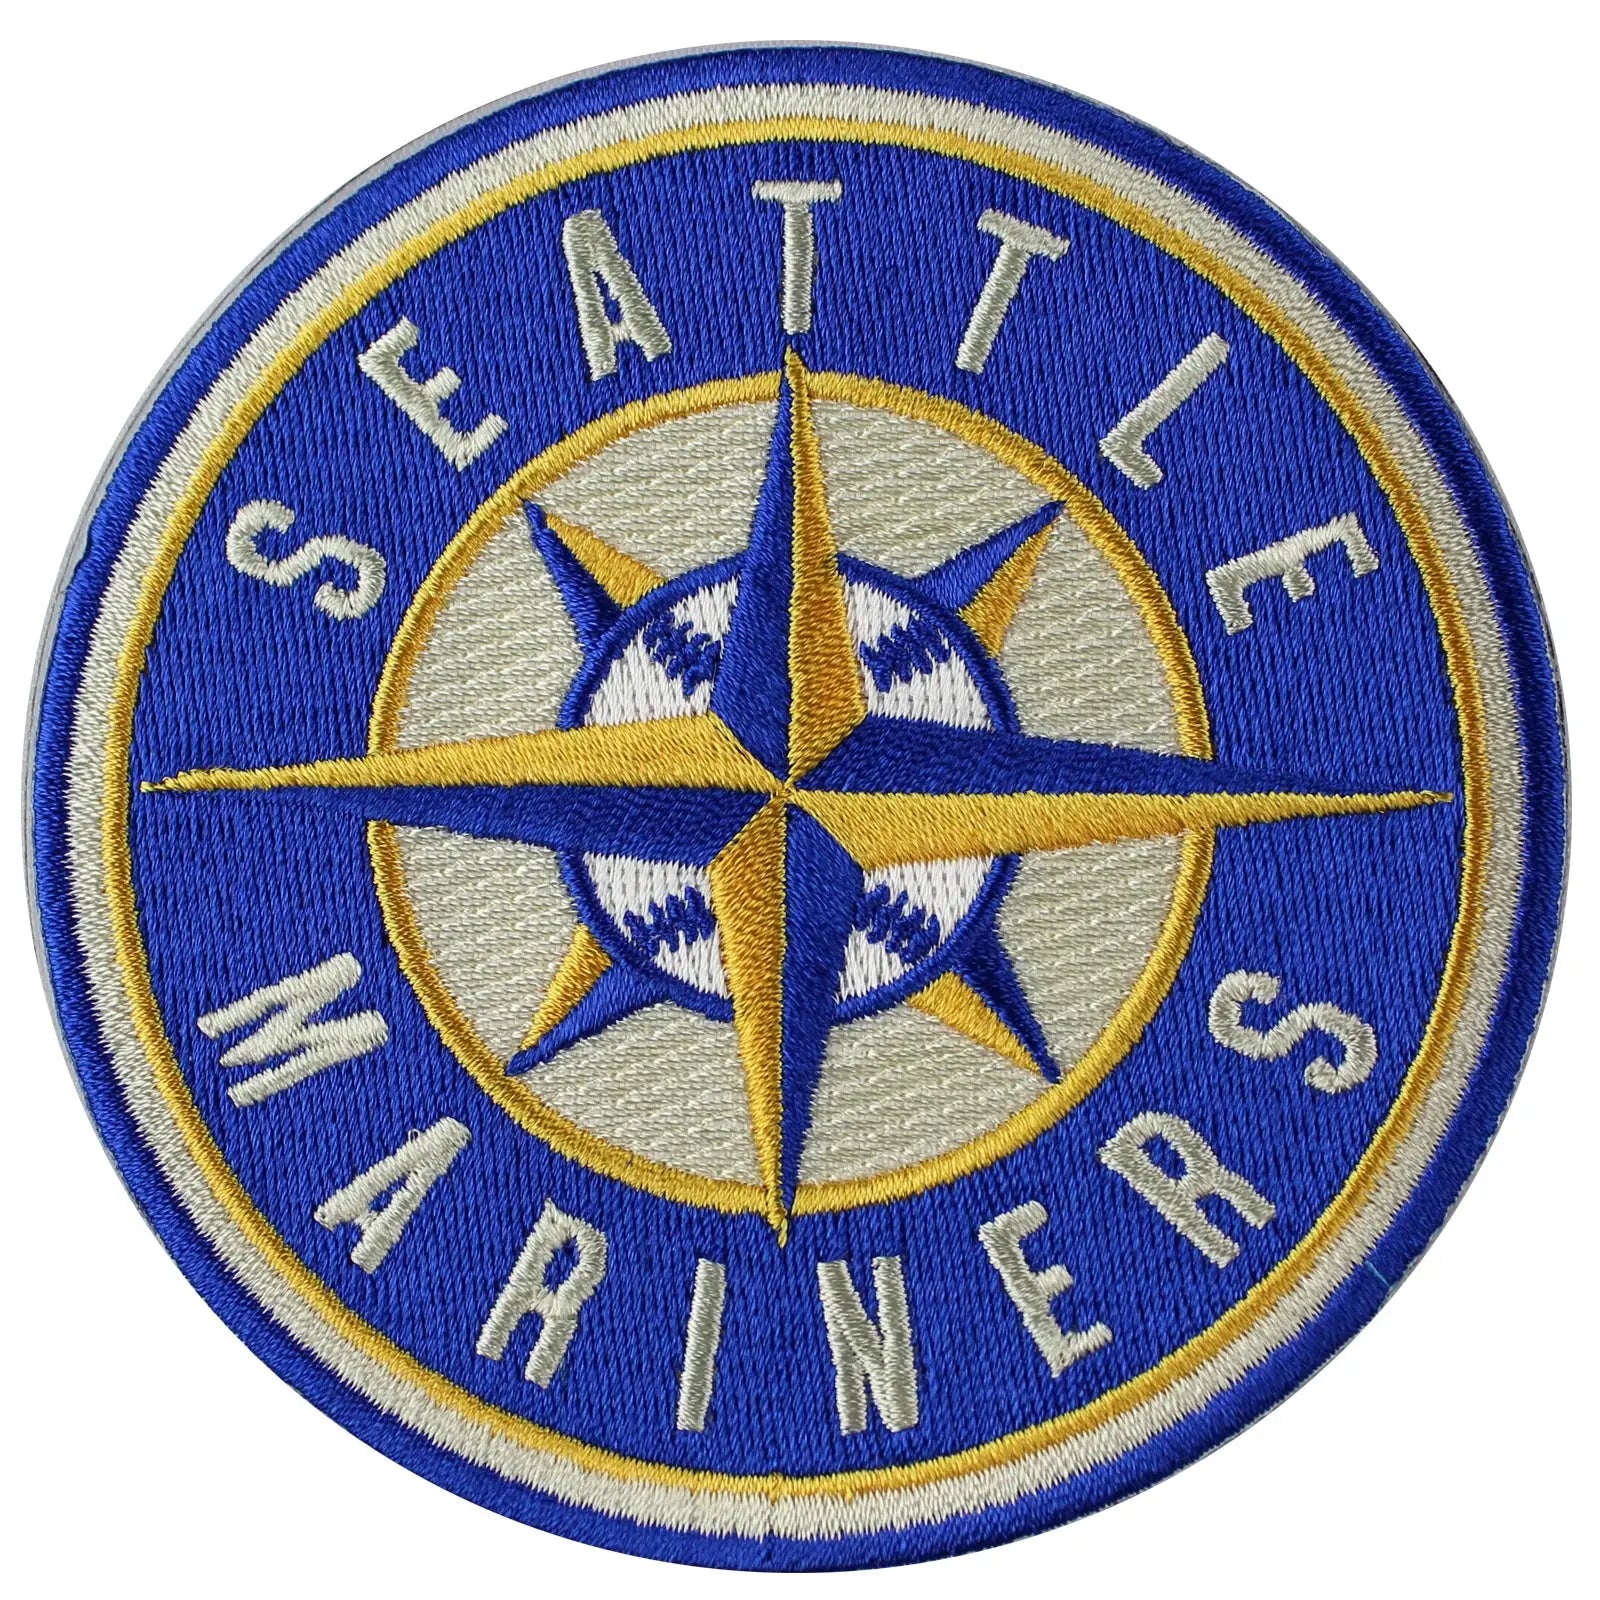 Seattle Mariners flag color codes